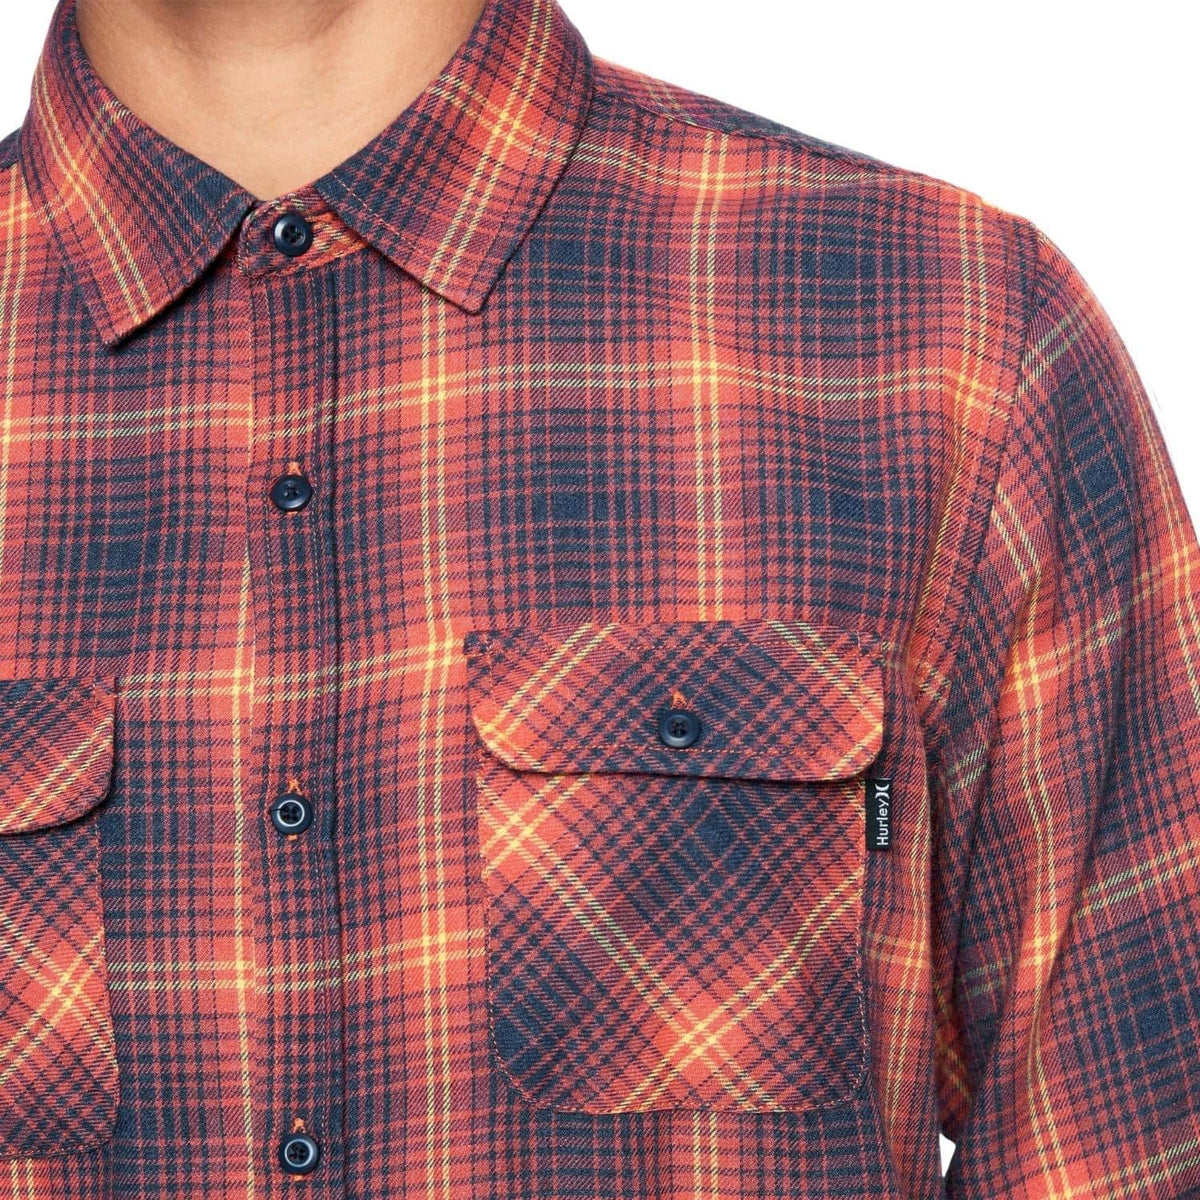 Hurley Bend Burnout Long Sleeve Flannel Shirt - Gym Red - Mens Flannel Shirt by Hurley